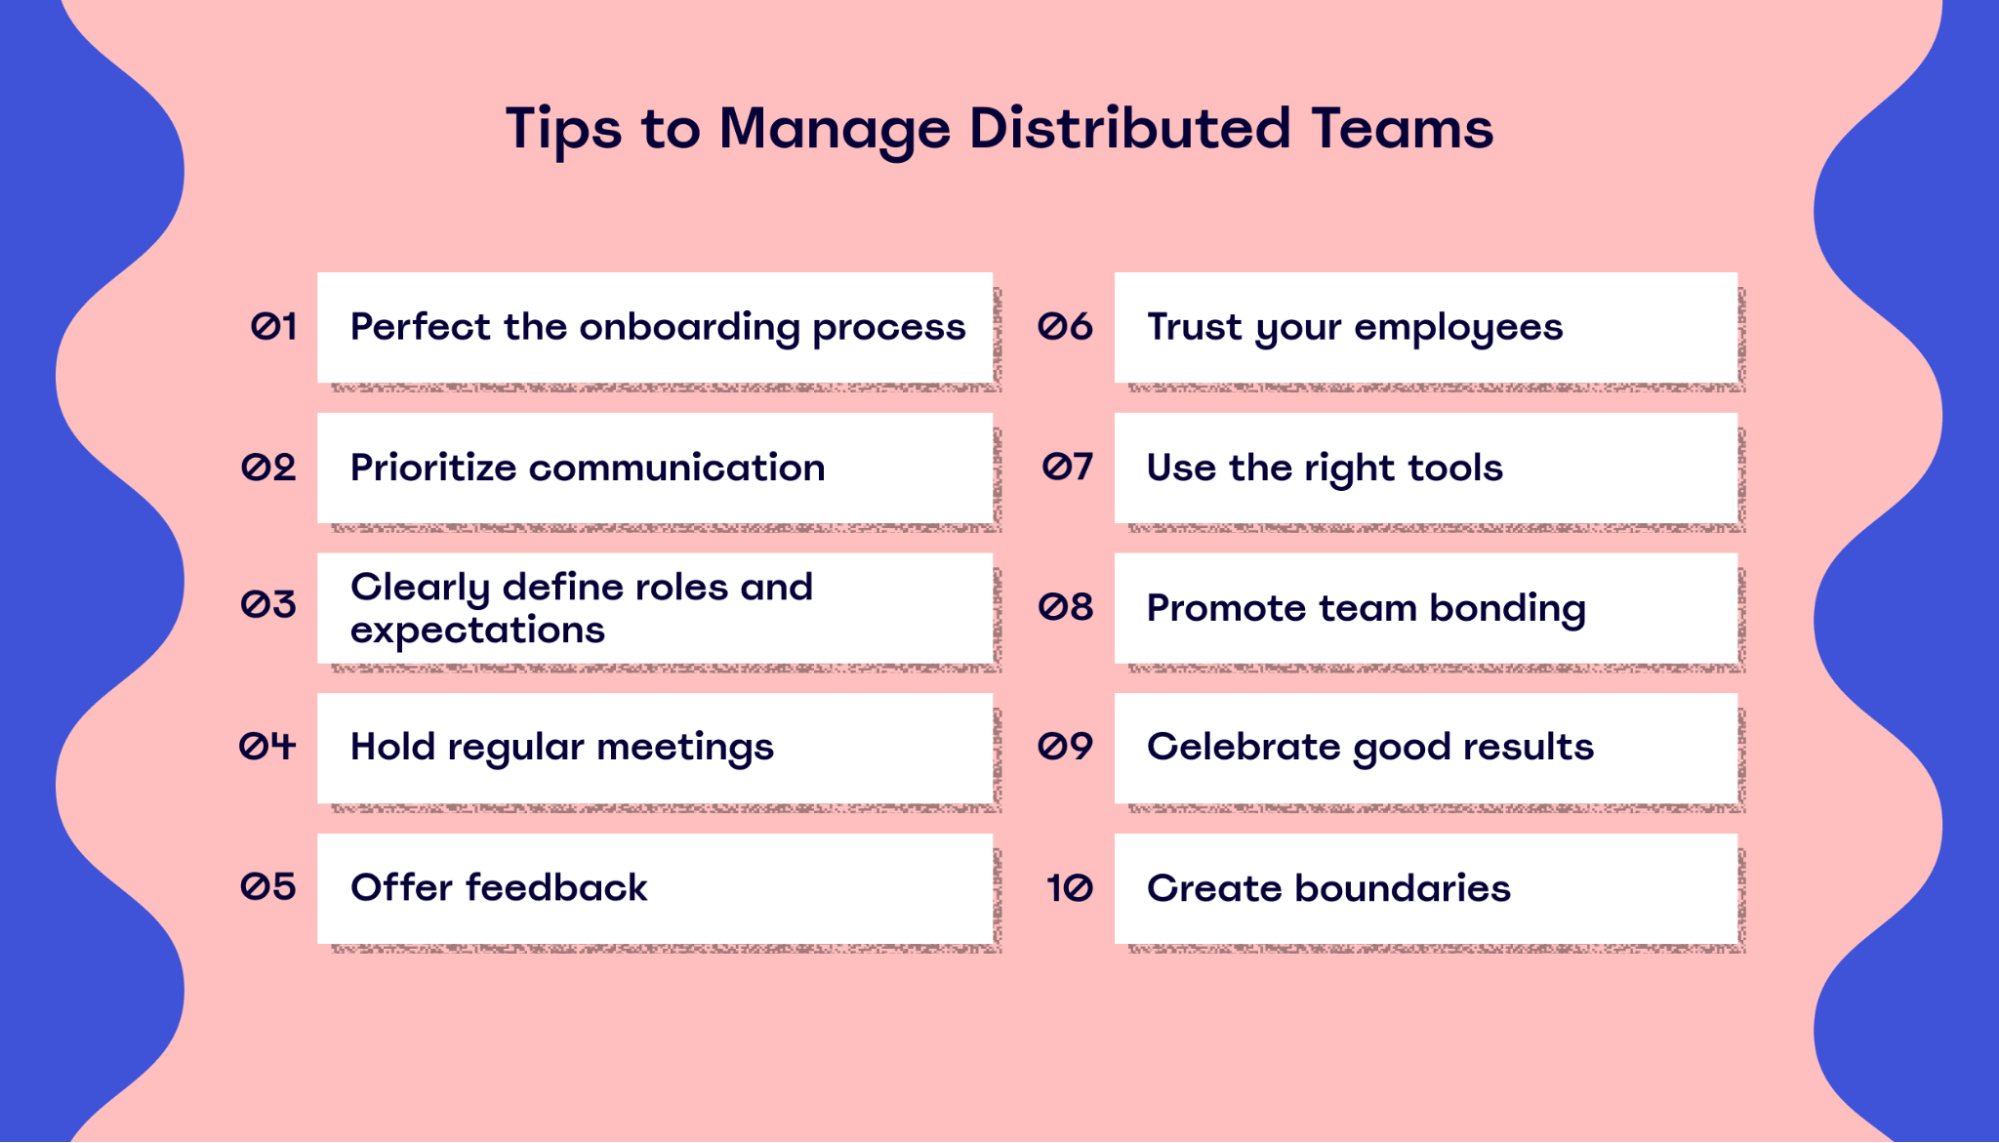 How to effectively manage distributed teams